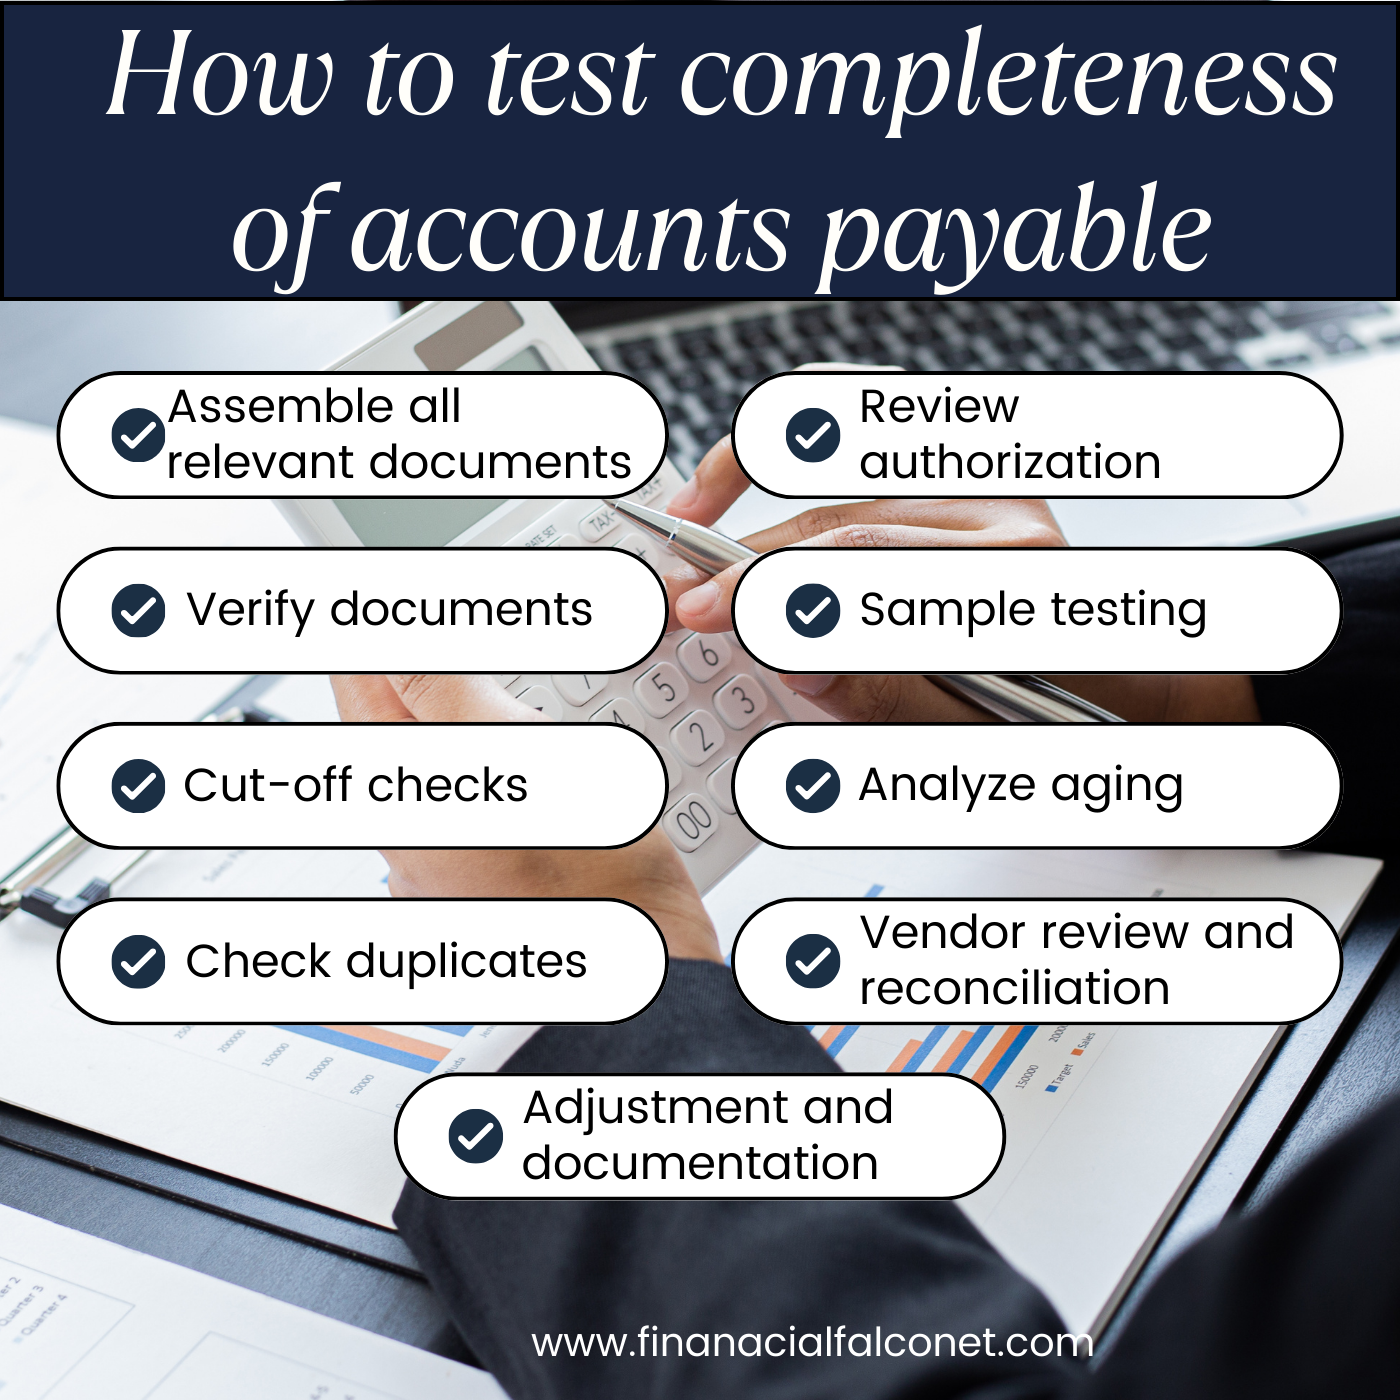 How to test completeness of accounts payable